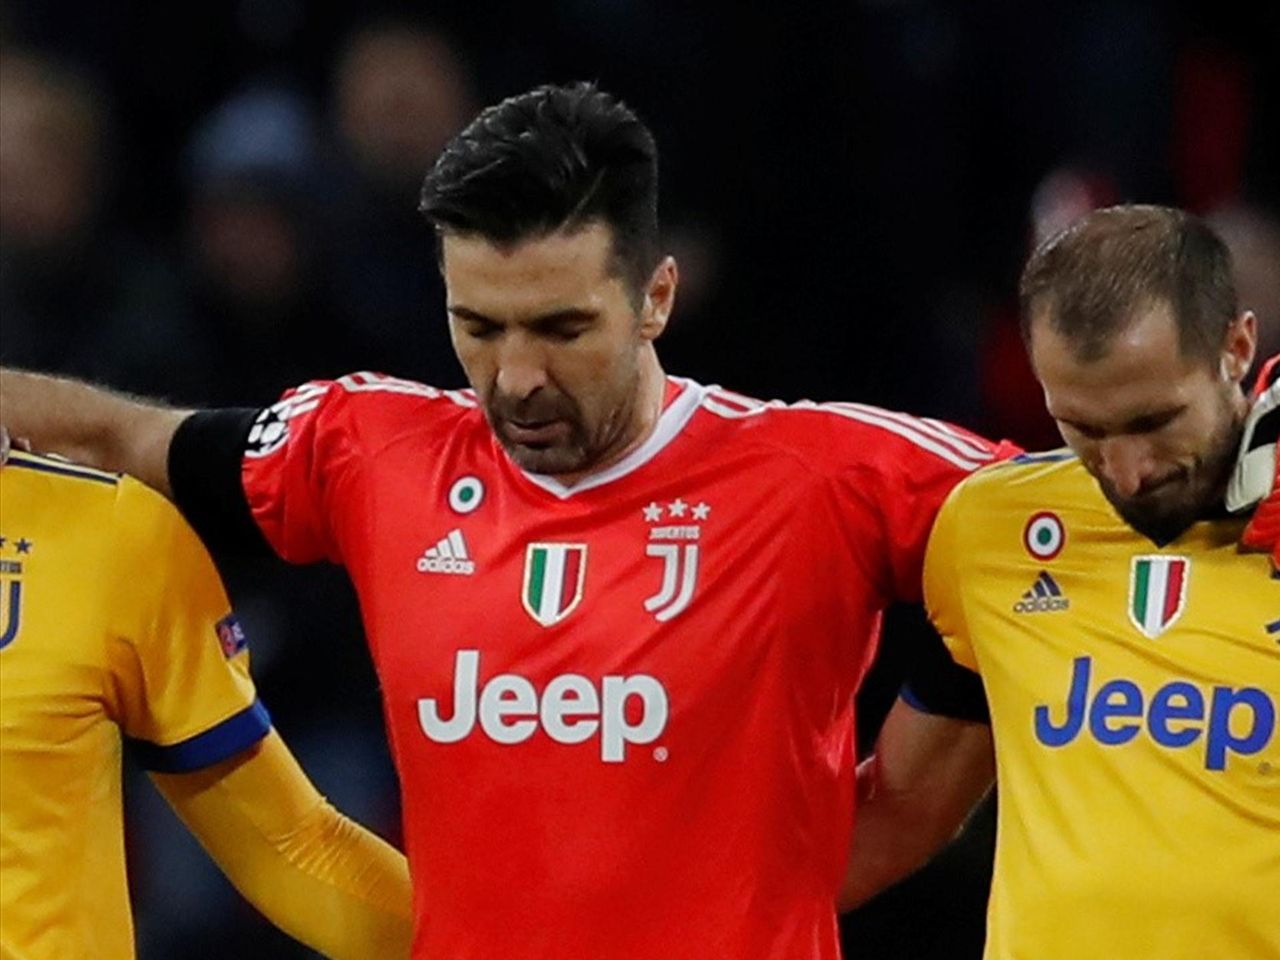 We Go To Give Our Last Ciao Together Giorgio Chiellini Pays Emotional Tribute To Davide Astori Eurosport